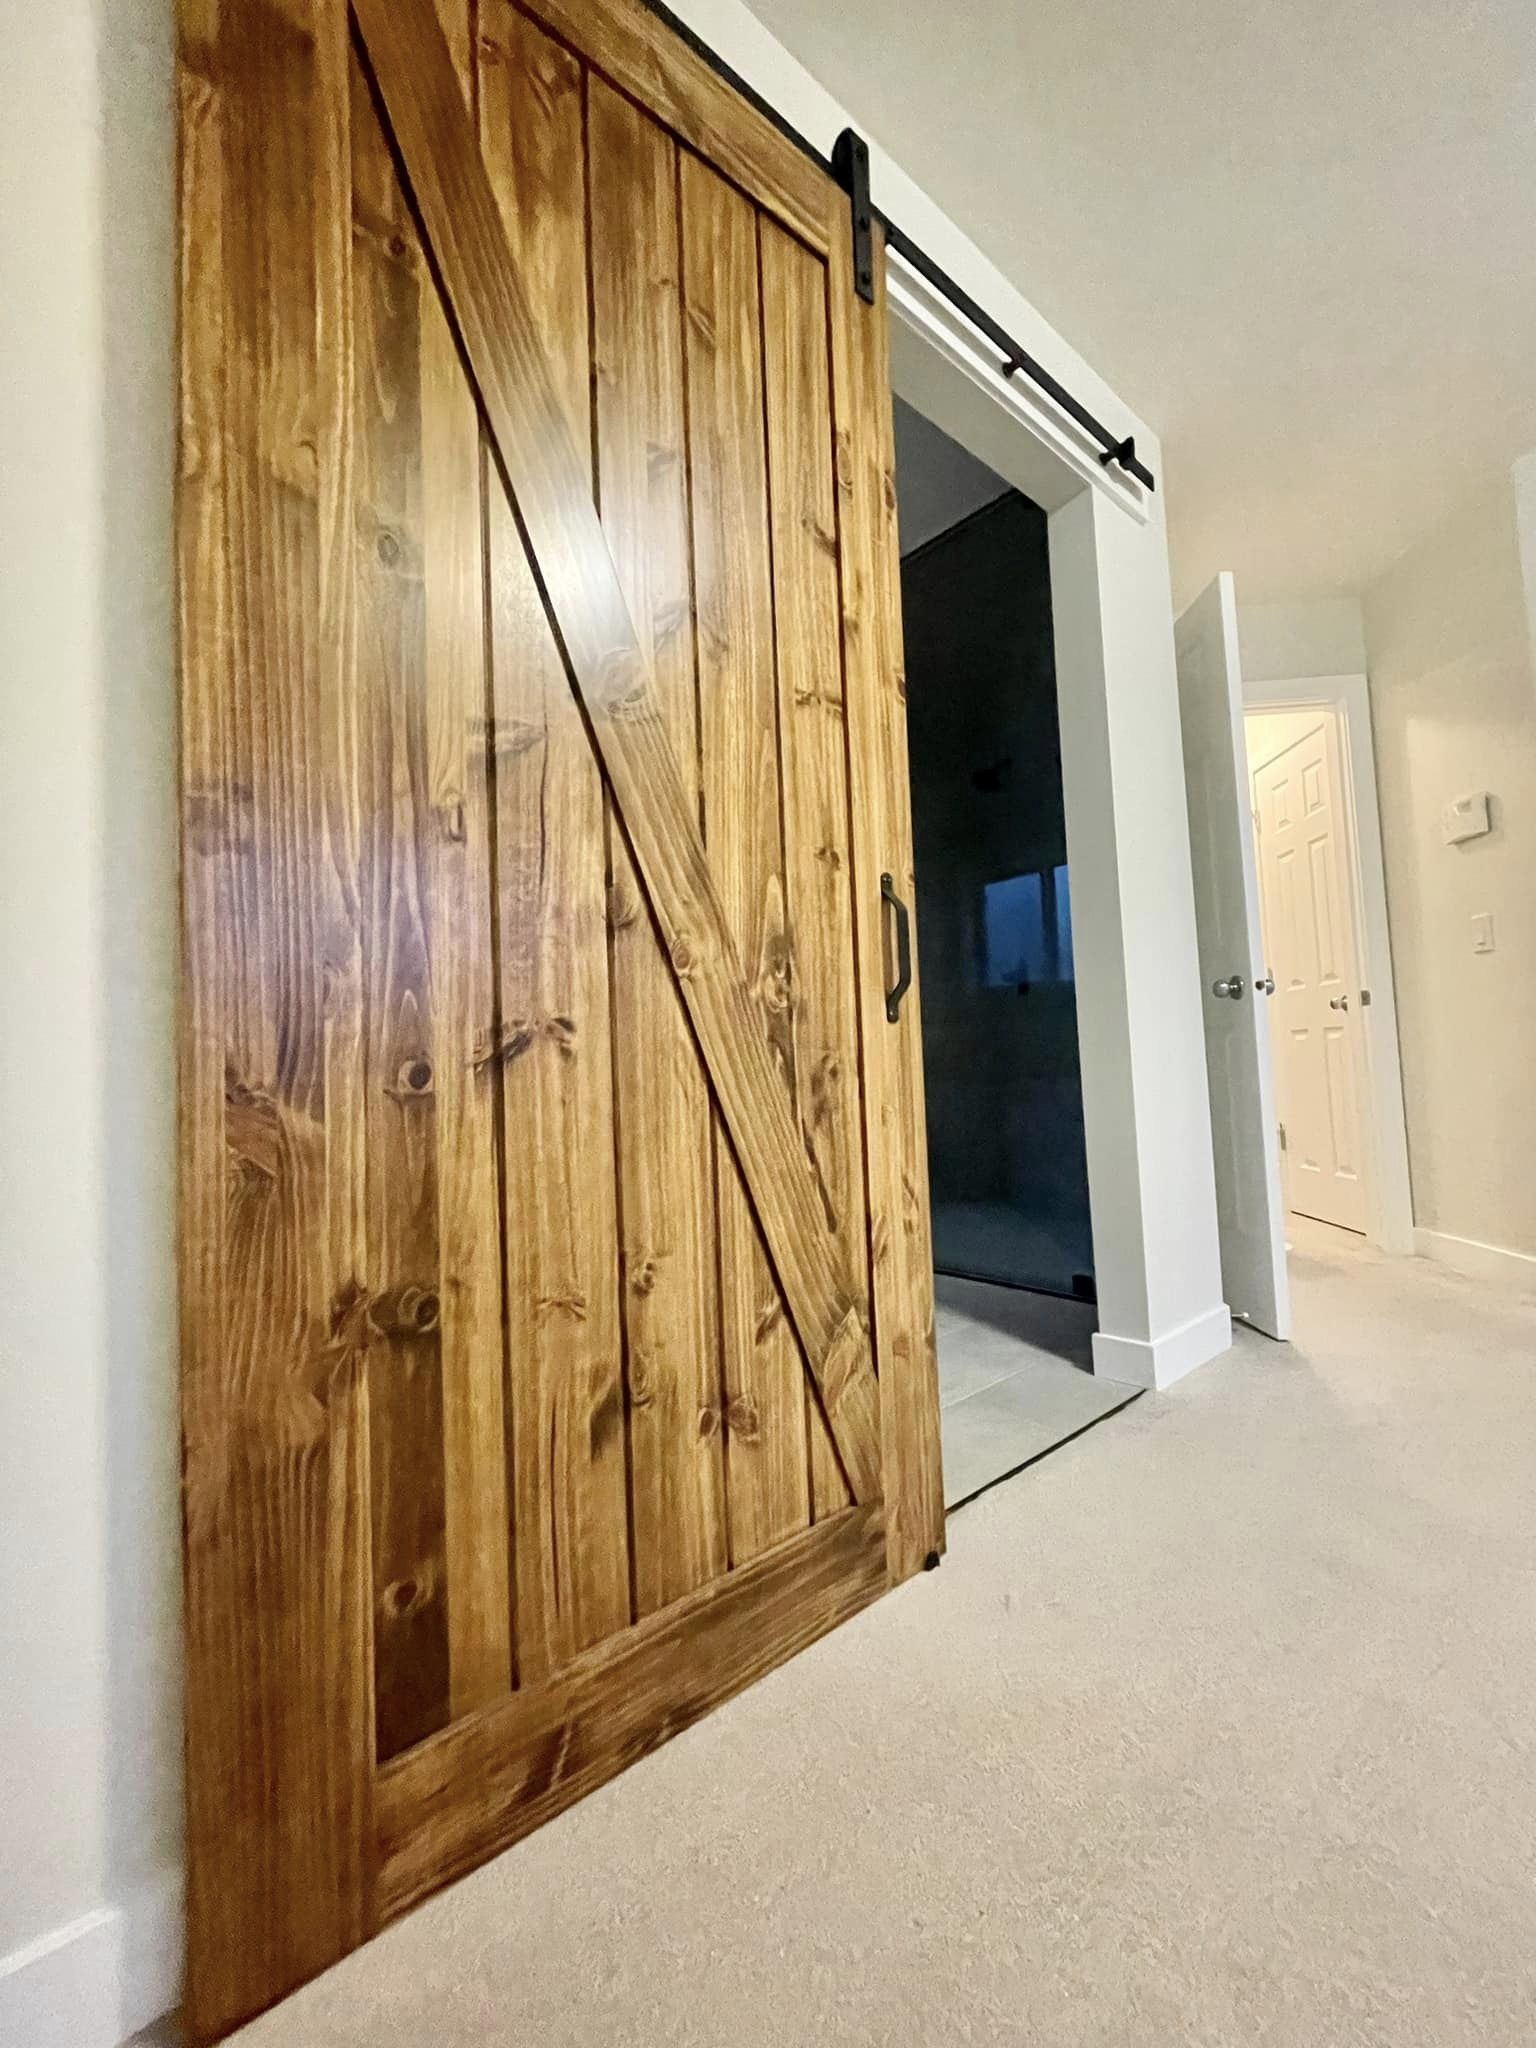 A wide view of the feature wooden barn door entry of a modern bathroom.